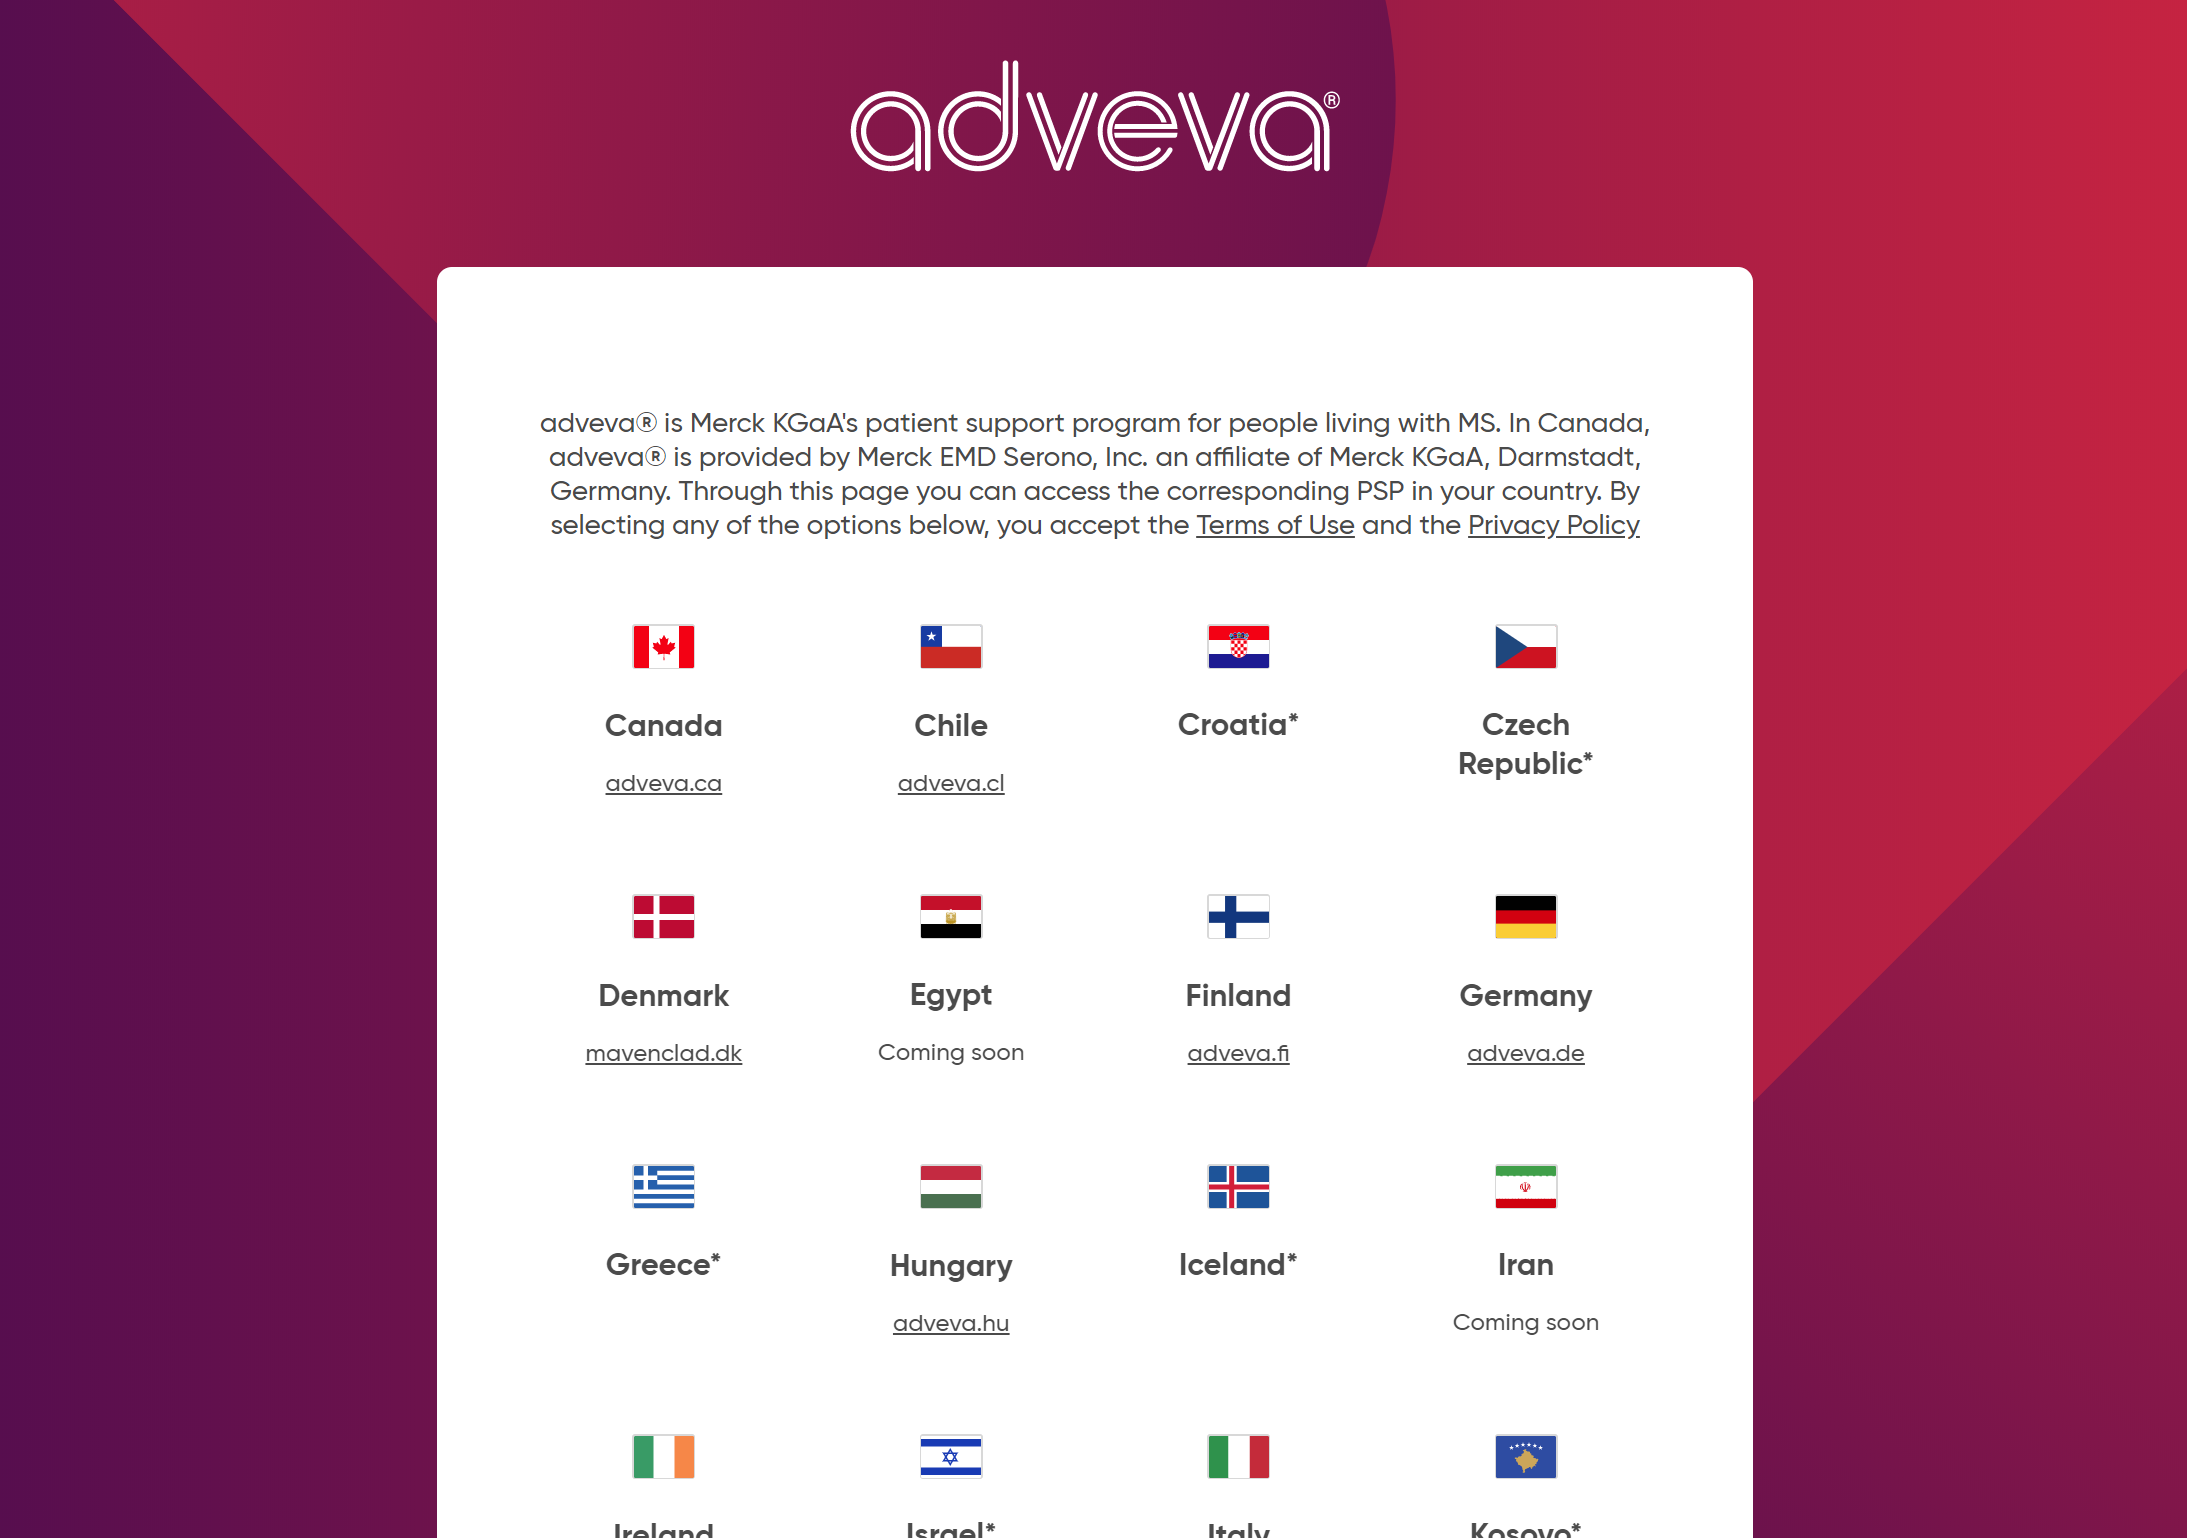 adveva, Merck KGaA’s patient education program for people living with MS, has been rolled out globally